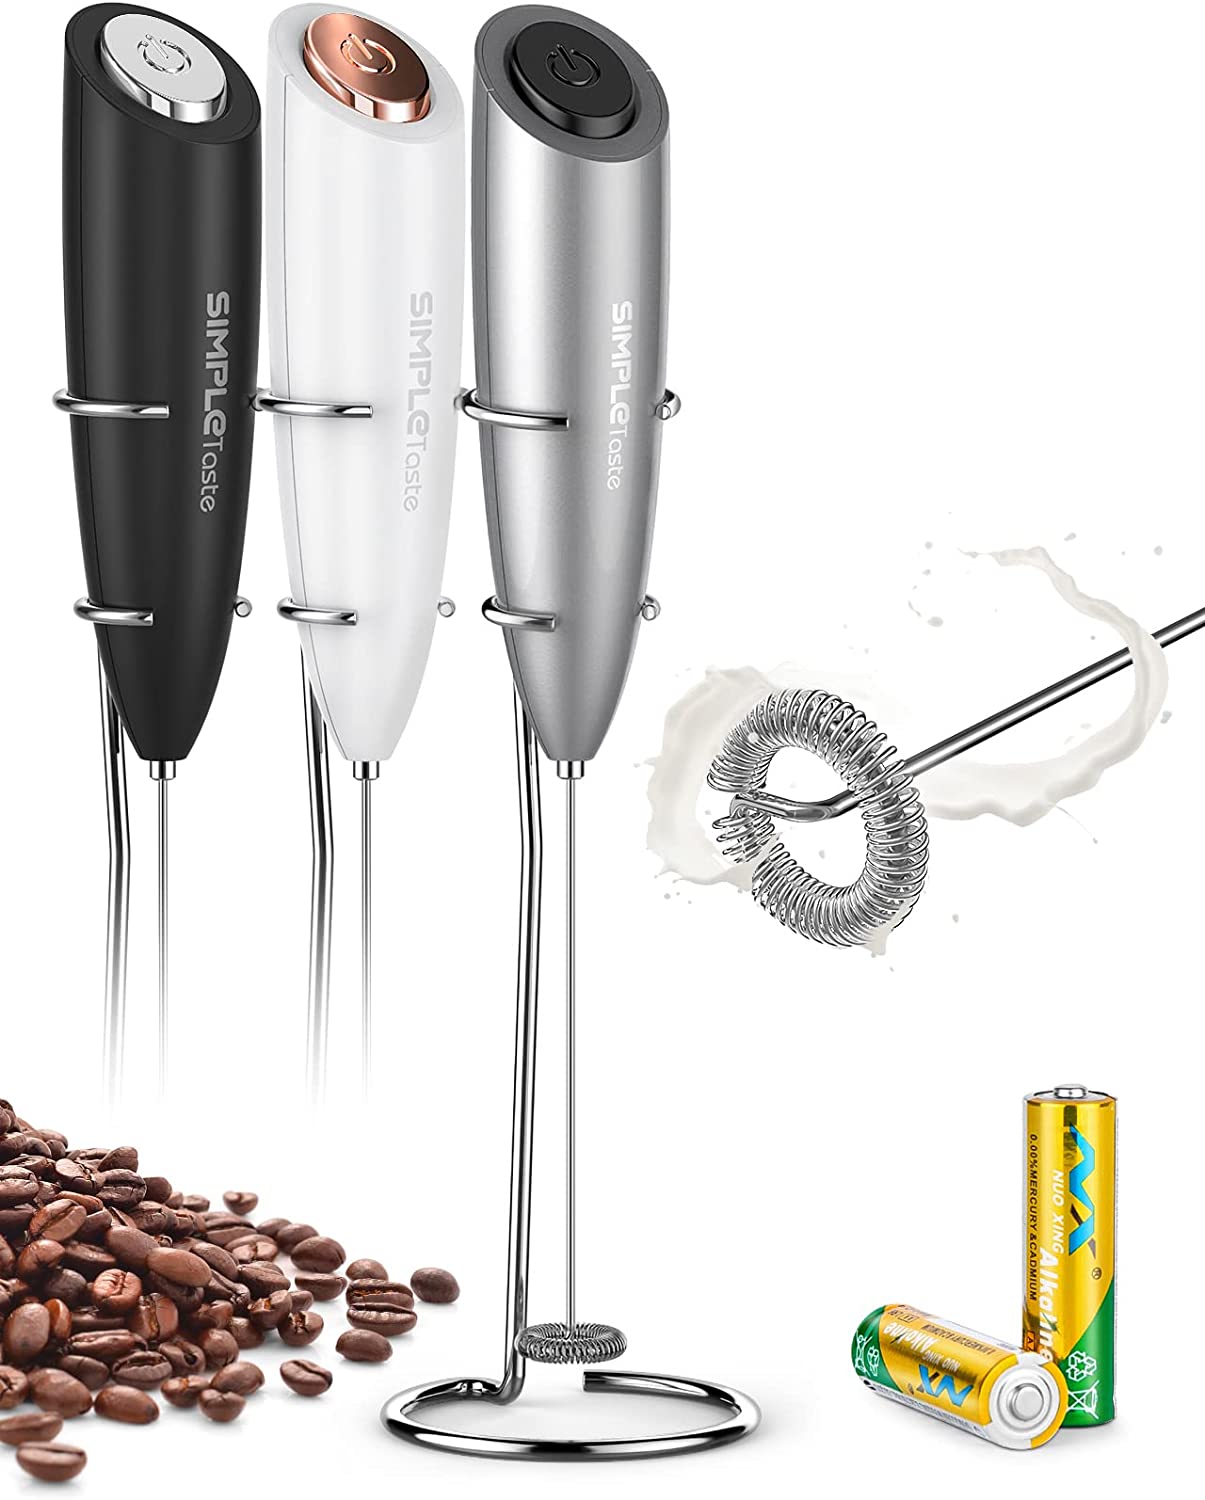 SimpleTaste One Button Milk Frother For Lattes